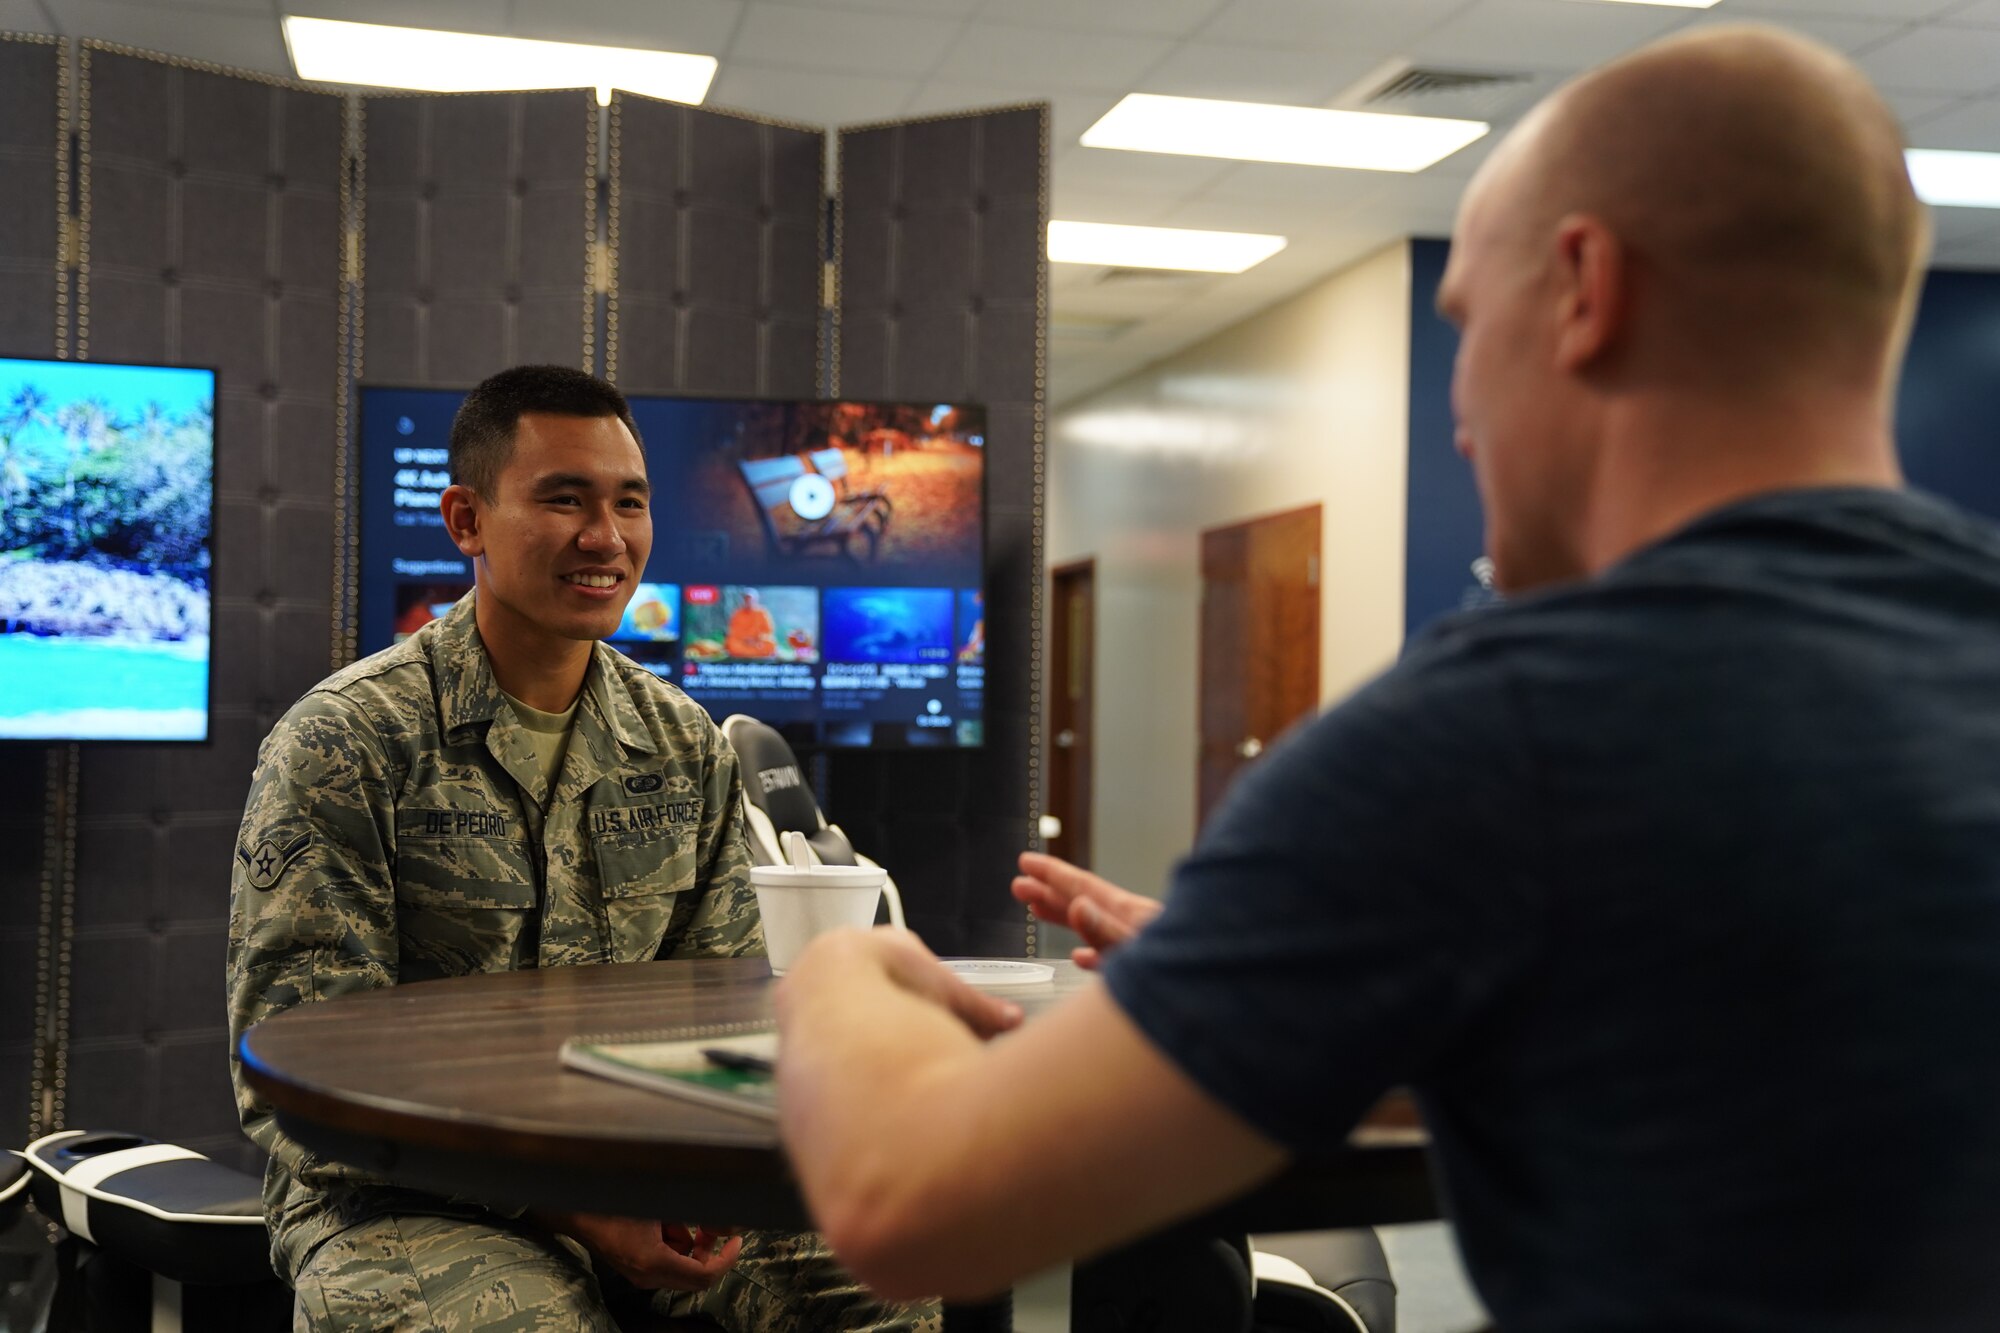 U.S. Air Force Airman John De Pedro, 81st Contract Squadron contract specialist, converses with a mentor during the first Leaders Influencing Together event inside the Larcher Chapel at Keesler Air Force Base, Mississippi, November 8, 2019.  The LIFT program pairs young and experienced Airmen together to build on various skills to improve the quality of their career. (U.S. Air Force photo by Airman 1st Class Spencer Tobler)